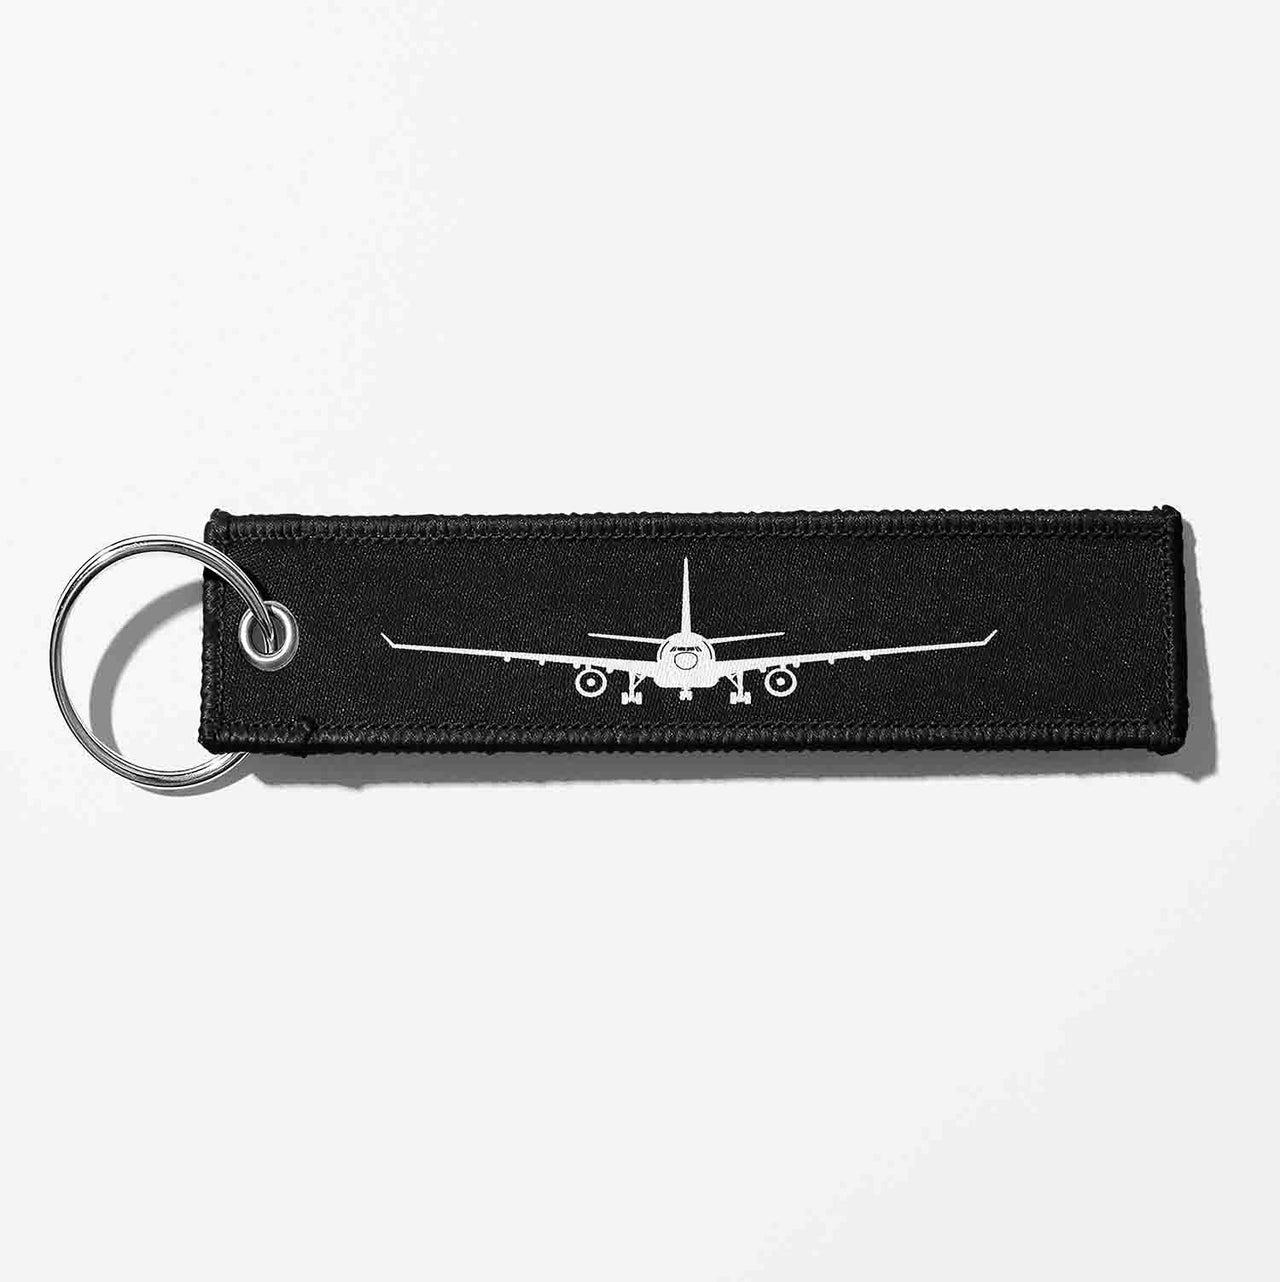 Airbus A330 Silhouette Designed Key Chains